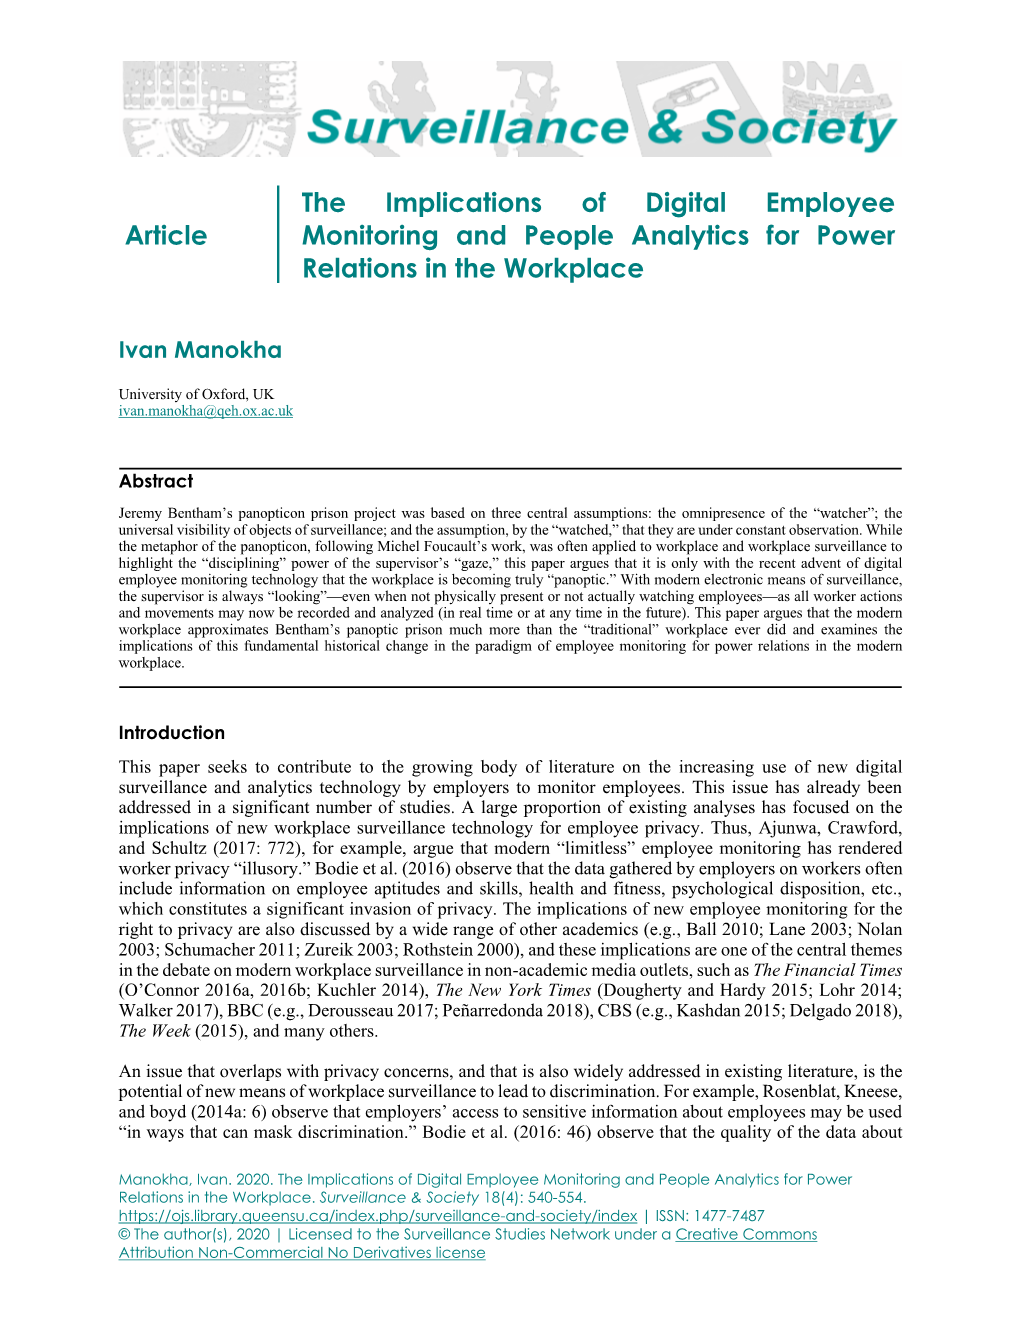 Article the Implications of Digital Employee Monitoring and People